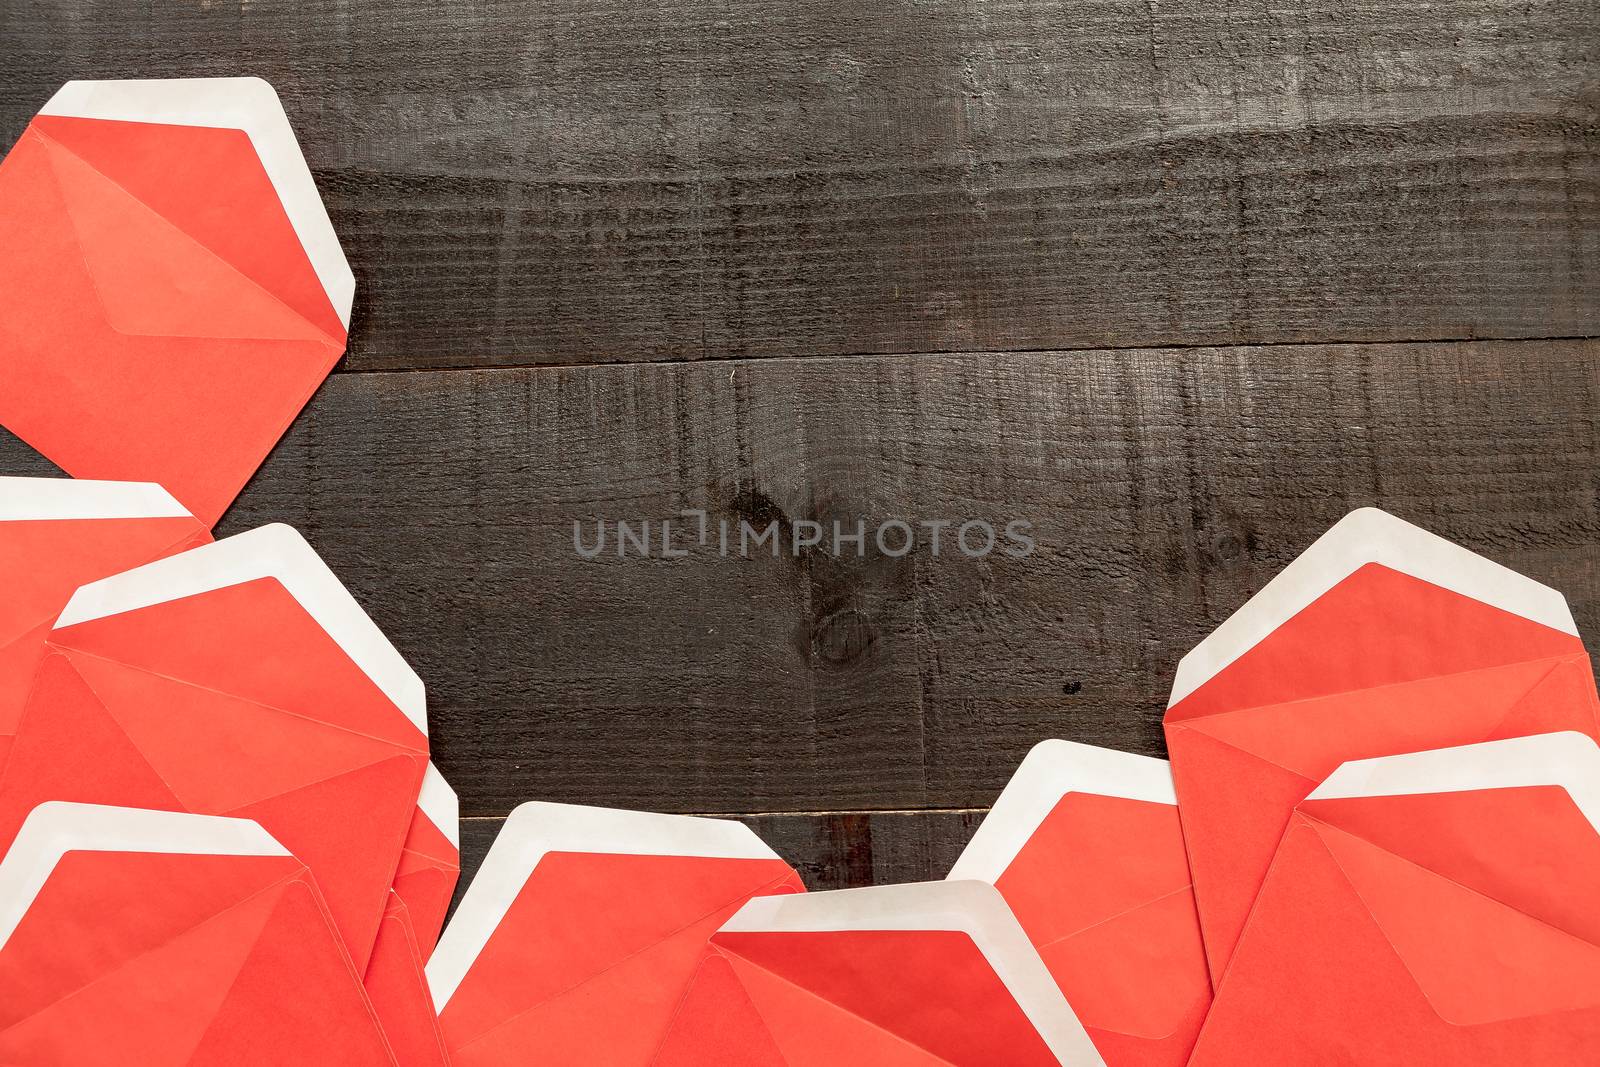 The image shows open red envelopes on wooden background